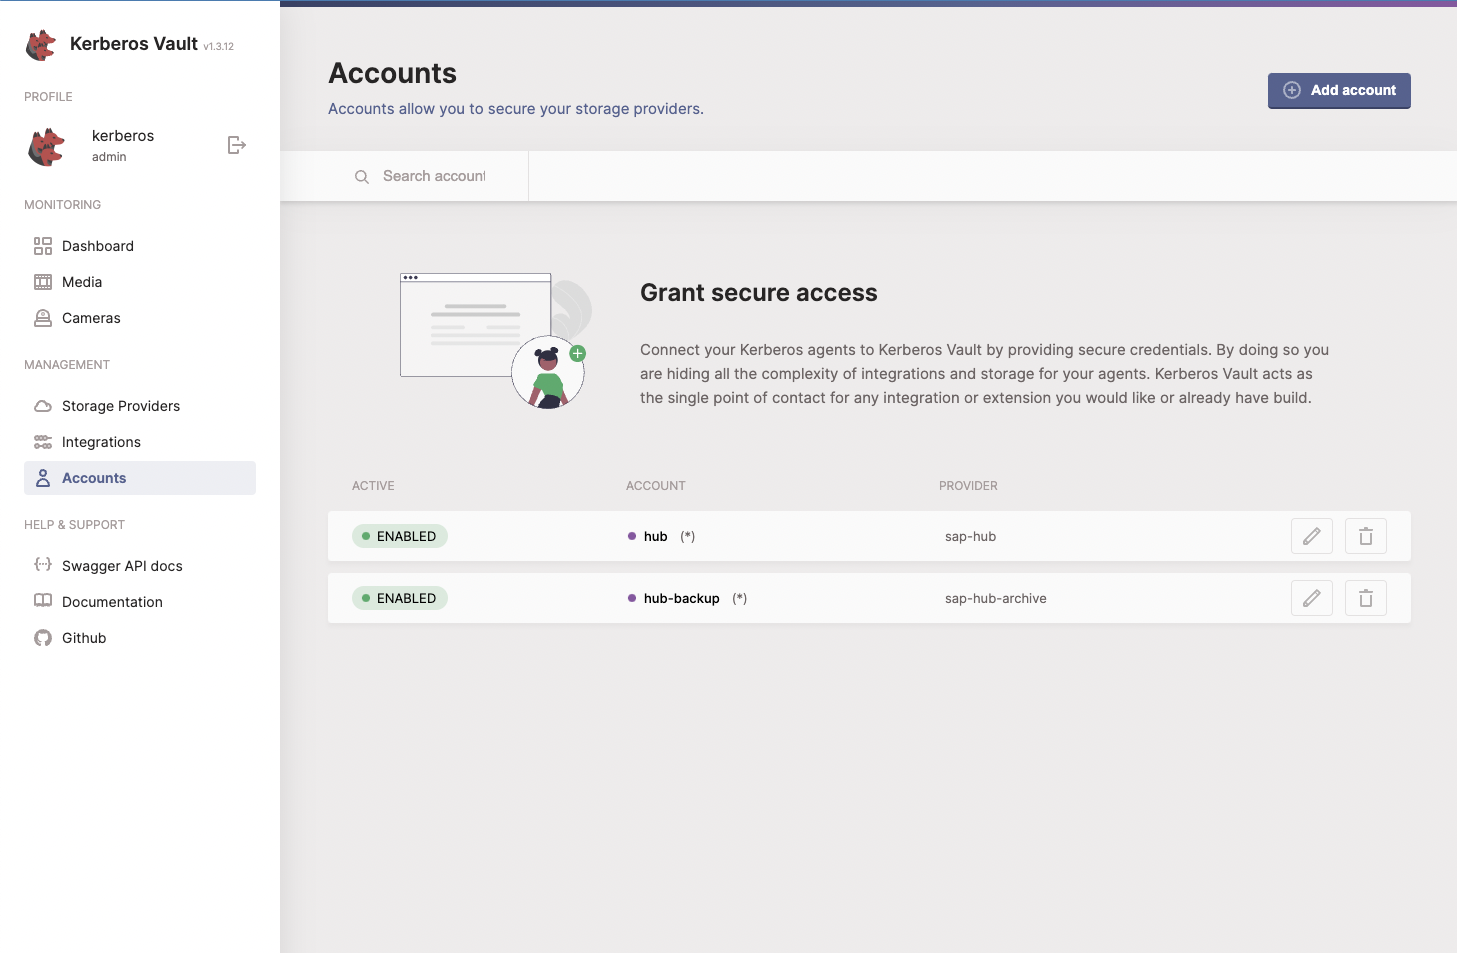 Create an account and credentials